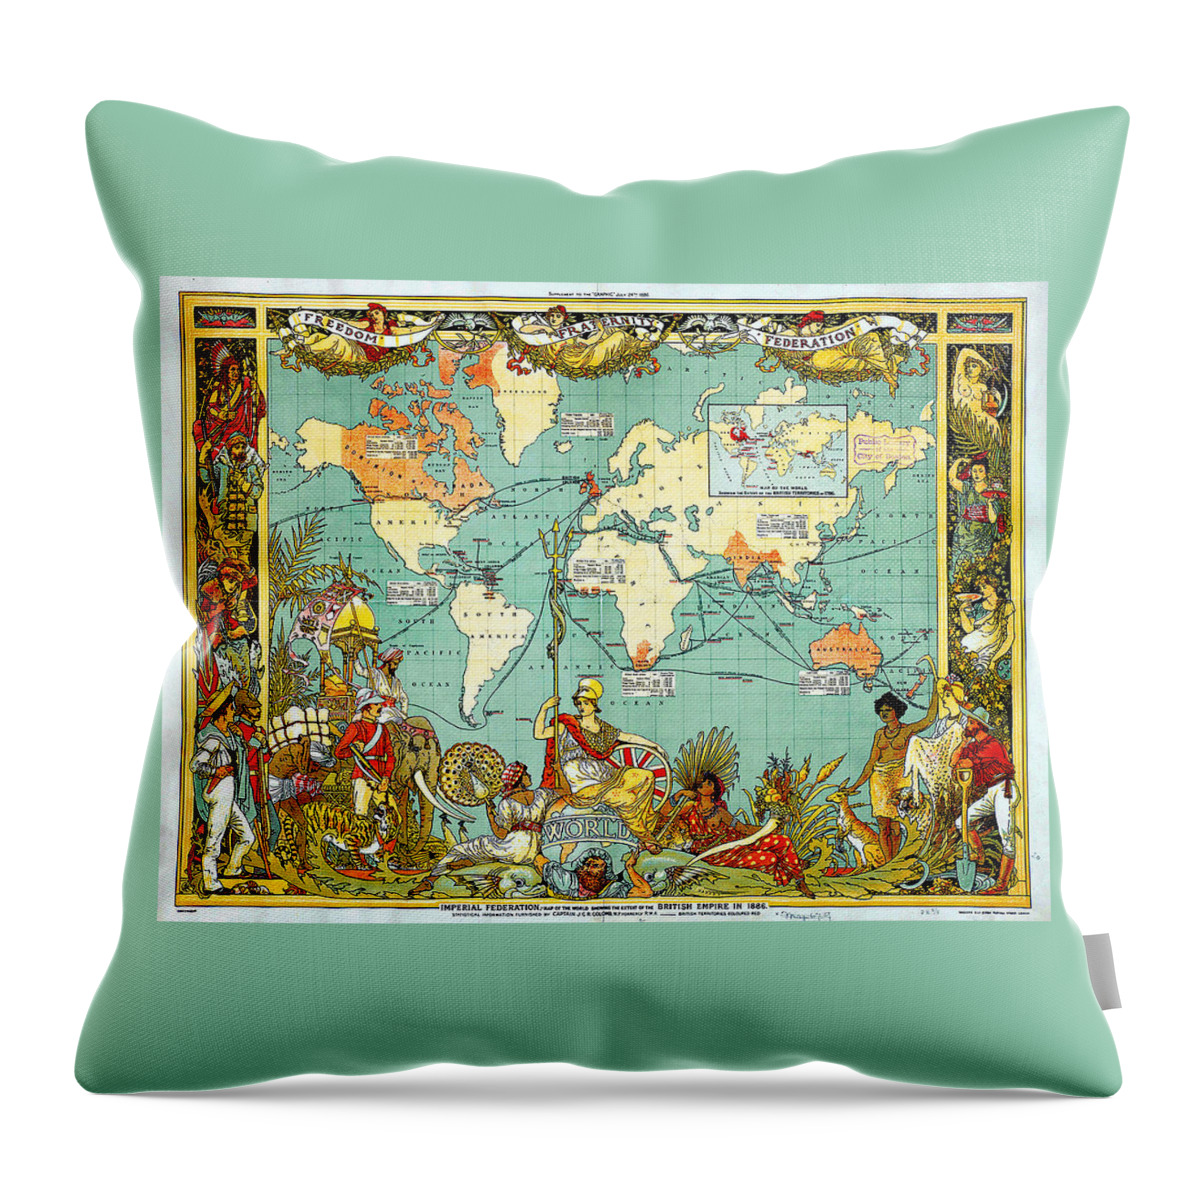 Imperial Federation Map Of The World Showing The Extent Of The British Empire In 1886 Levelled Throw Pillow featuring the painting Imperial Federation Map of the World Showing the Extent of the British Empire in 1886 levelled by MotionAge Designs